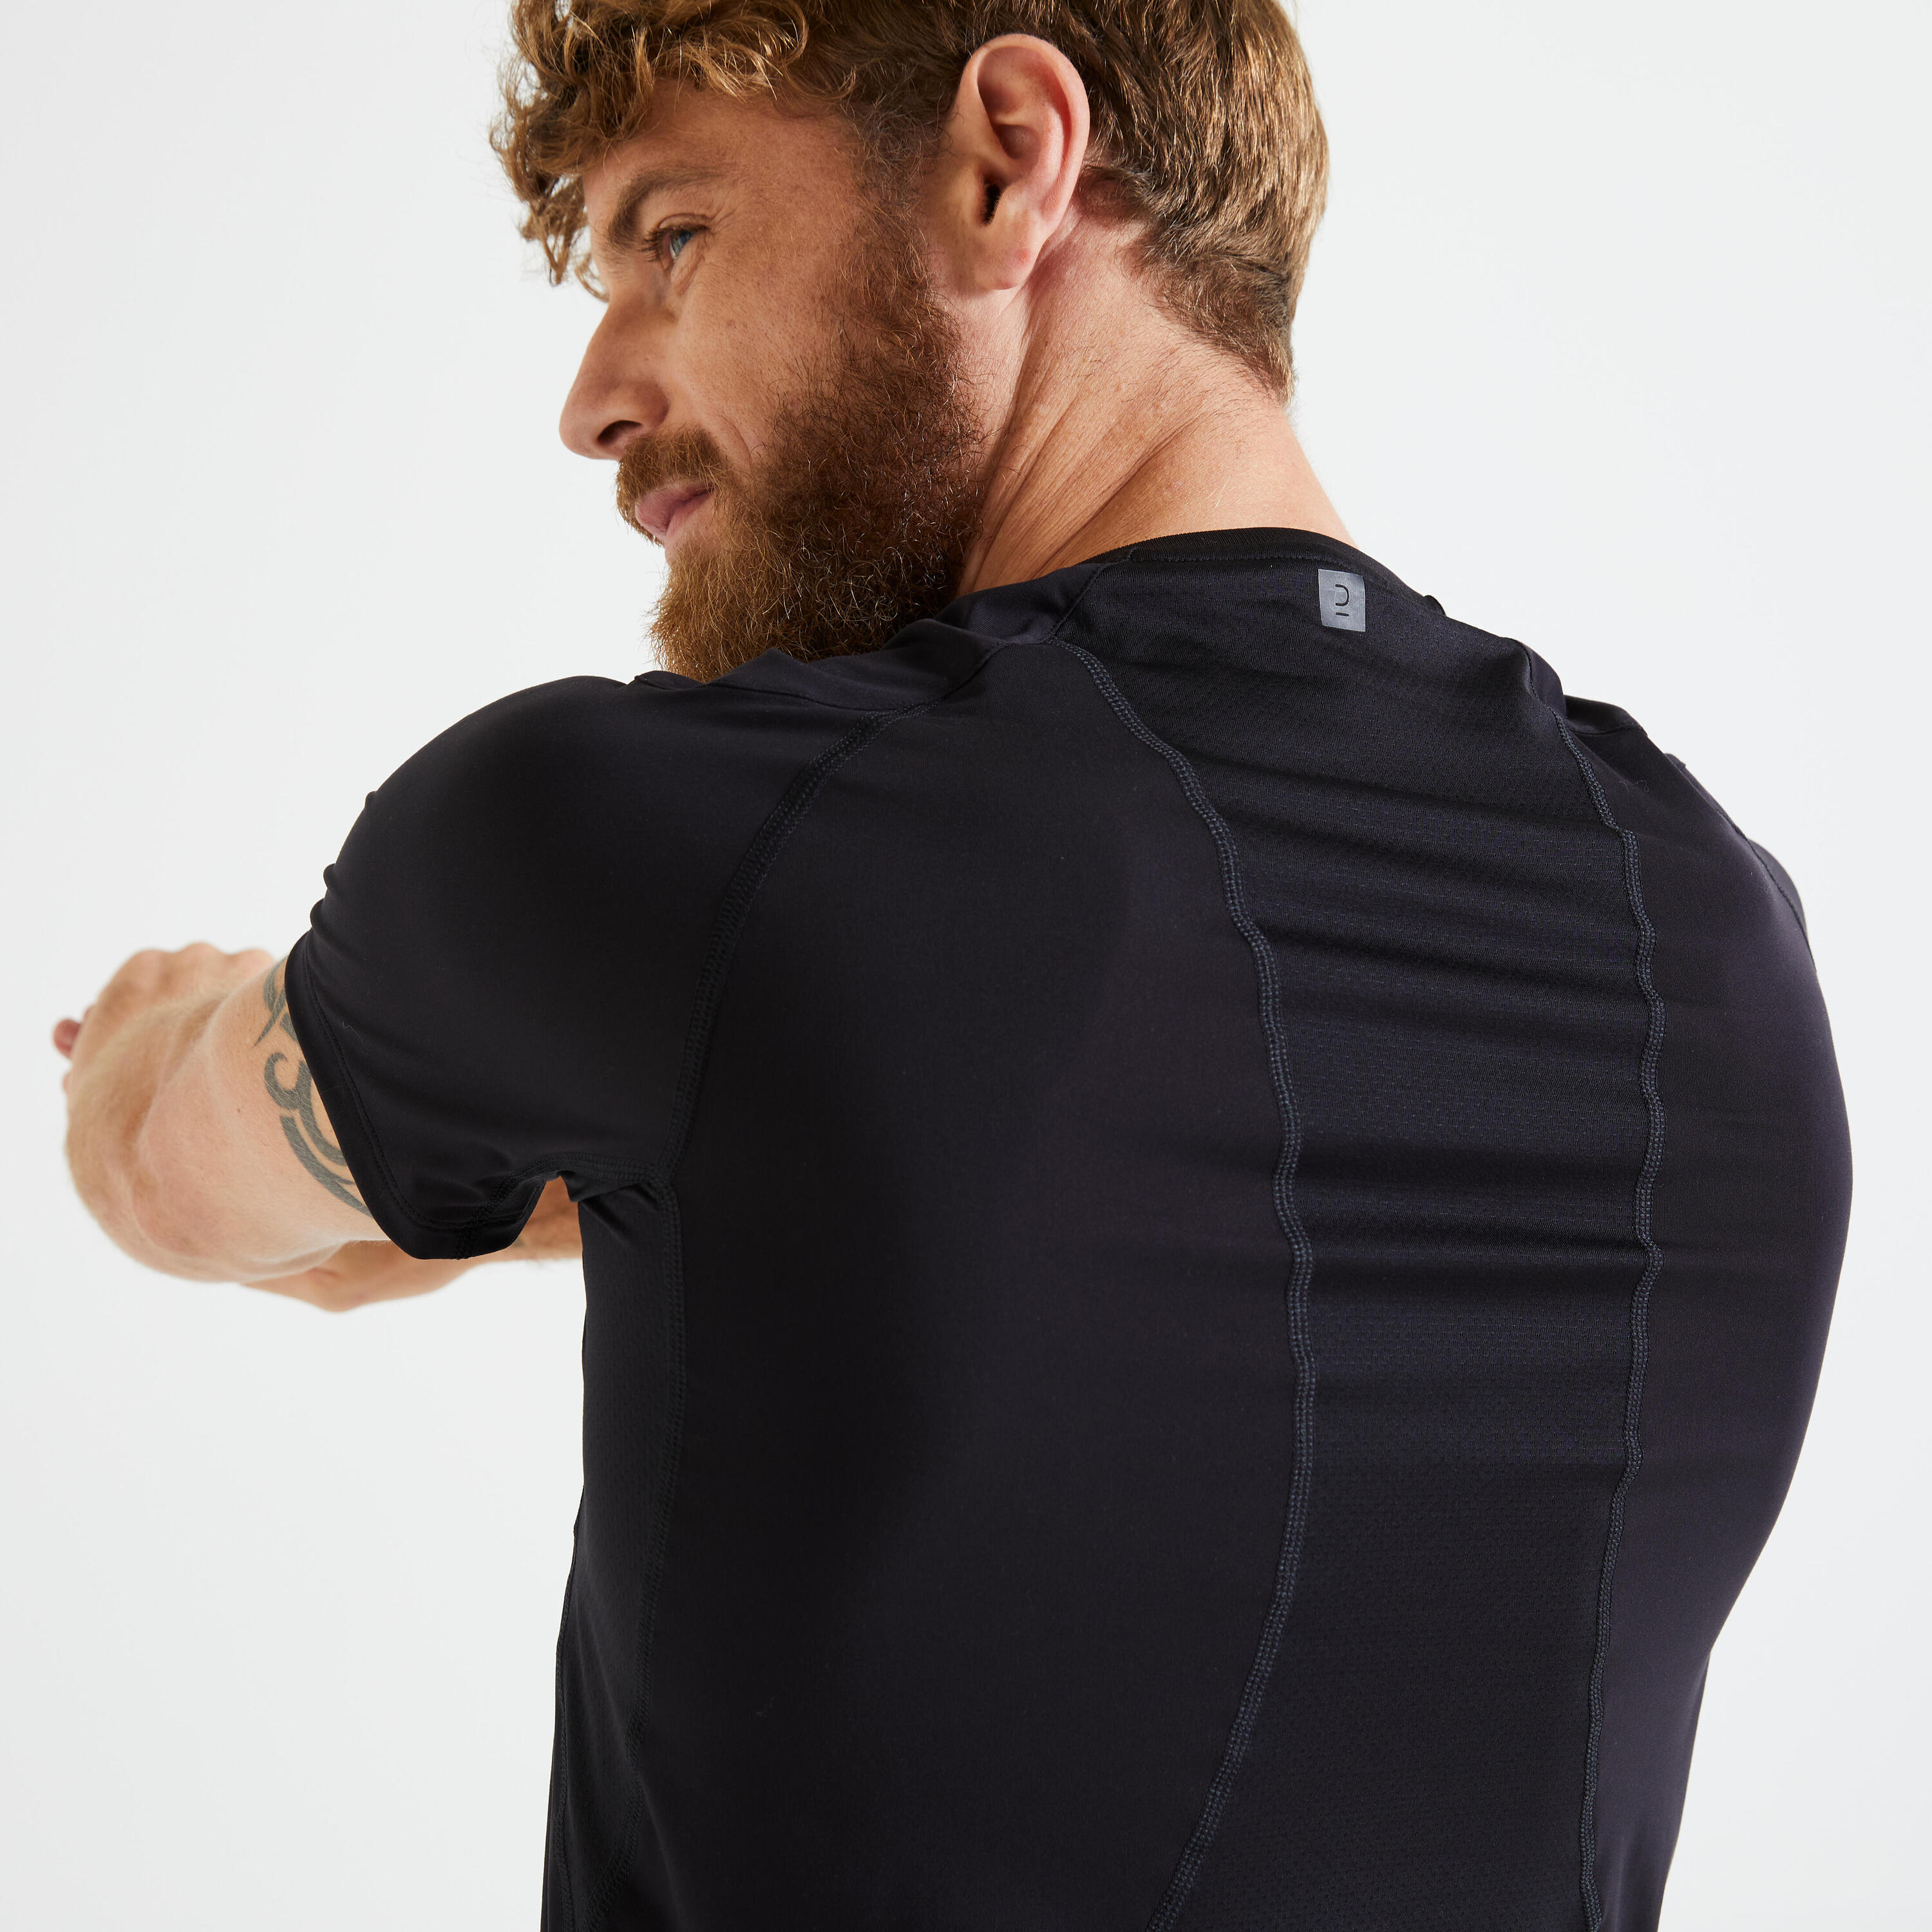 Technical Fitness T-Shirt - Solid Black 4/5